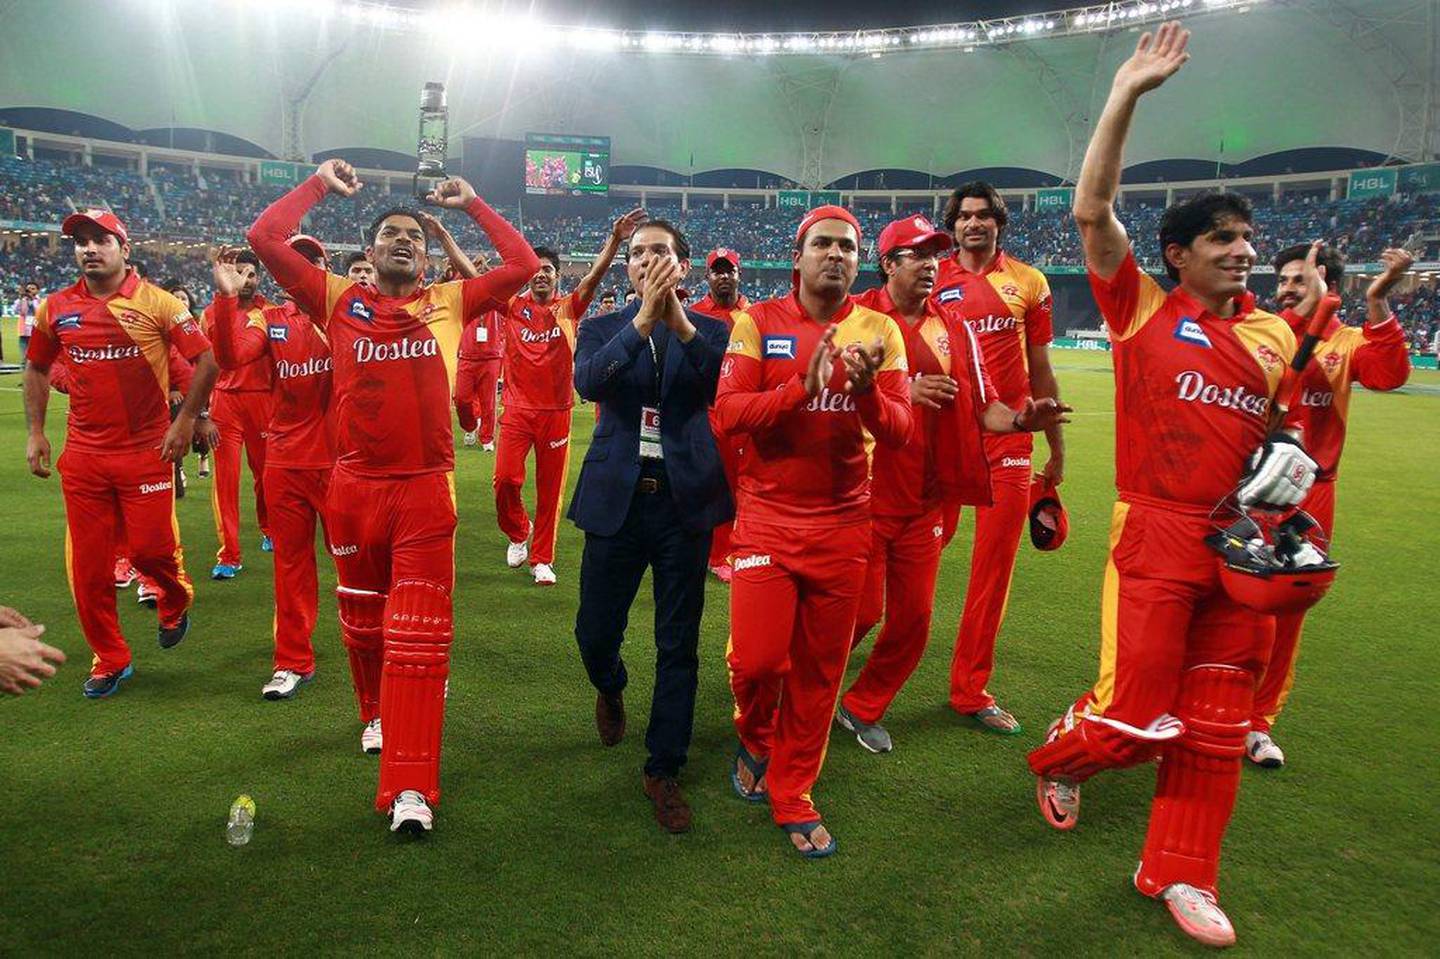 Players from the Islamabad United team celebrate winning the final of the Pakistan Super League against Quetta Gladiators at the Dubai cricket stadium on February 23, 2016. AFP